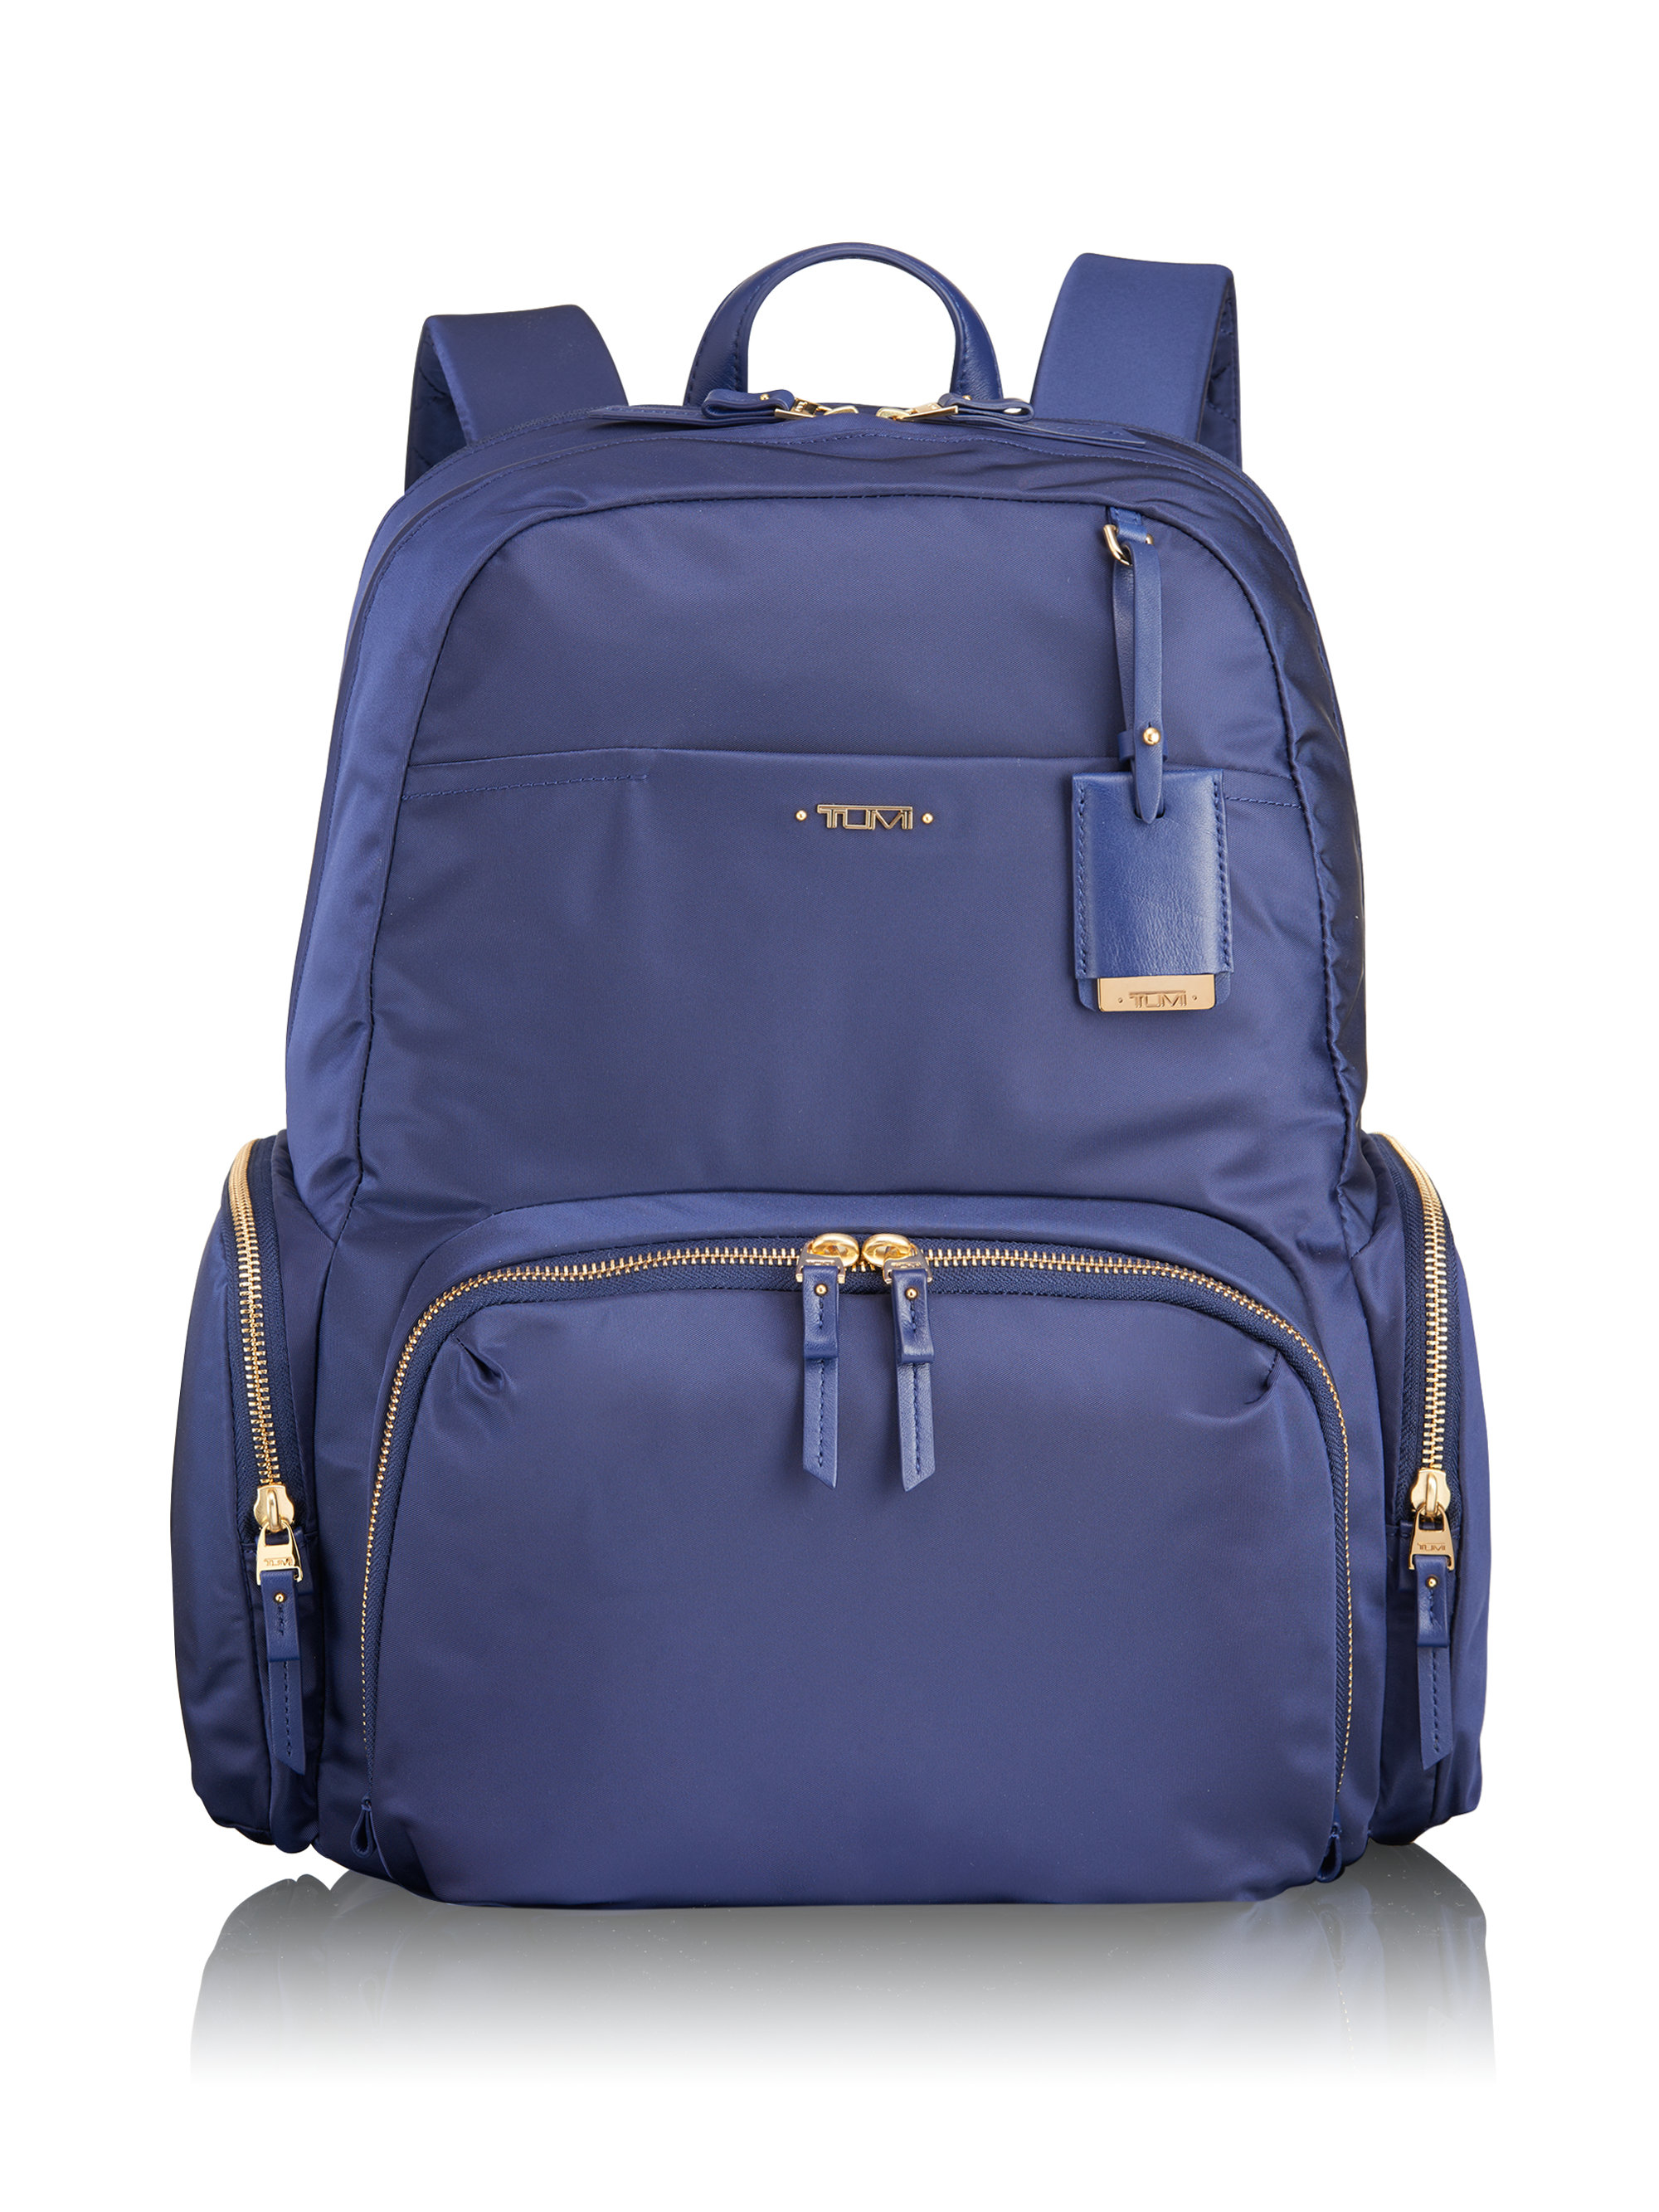 Lyst - Tumi Voyageur Calais Backpack in Purple for Men